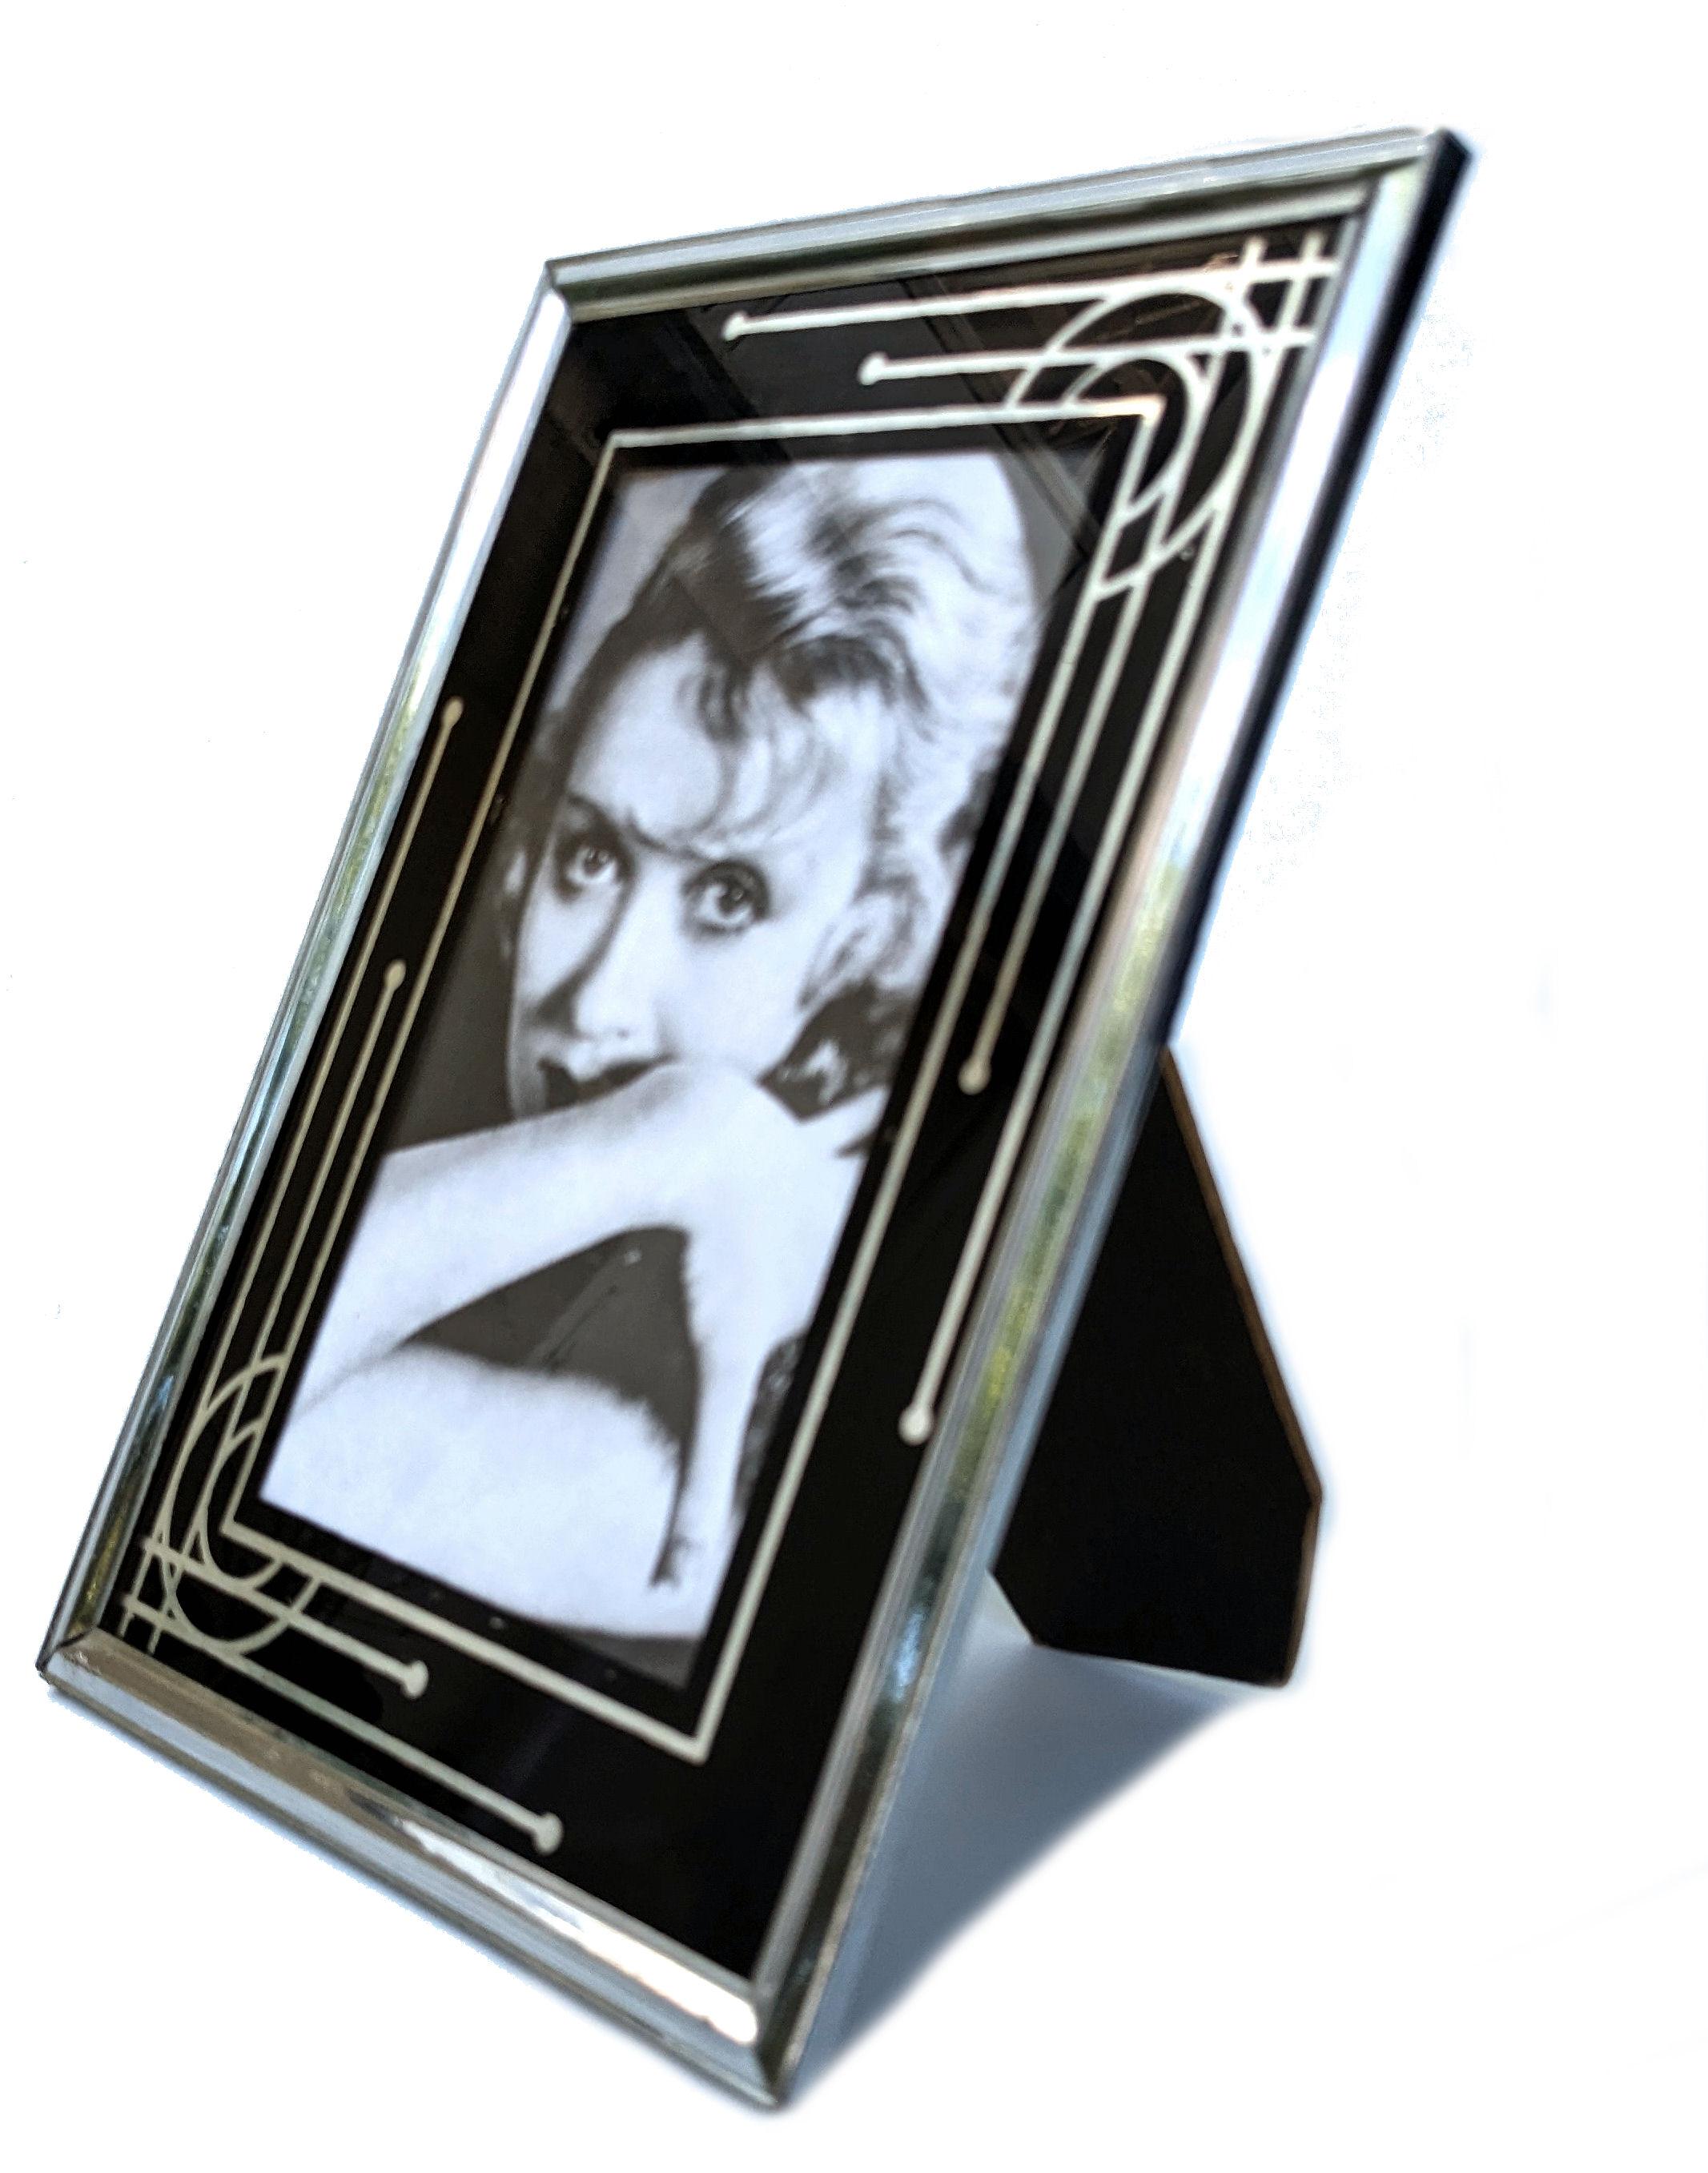 For your consideration is this very stylish original Art Deco free standing picture frame.  The geometric patterning on the glass is reverse painted in black and silver. Very iconic styling, one which can't be mistaken for any other era. The